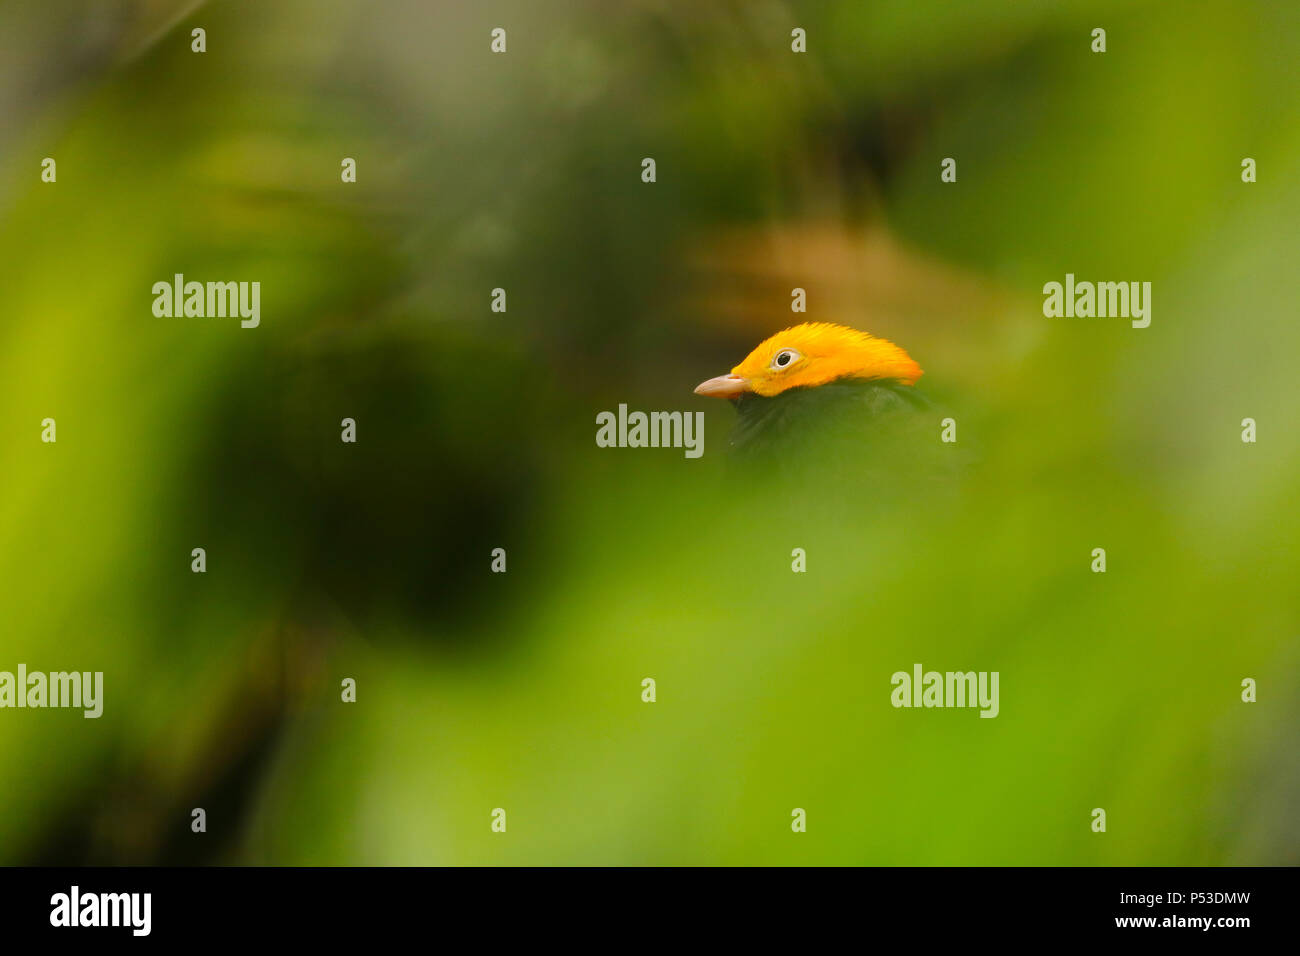 bright yellow head of a male golden-headed manakin (pipra erythrocephala) surrounded by blurry green leaves Stock Photo